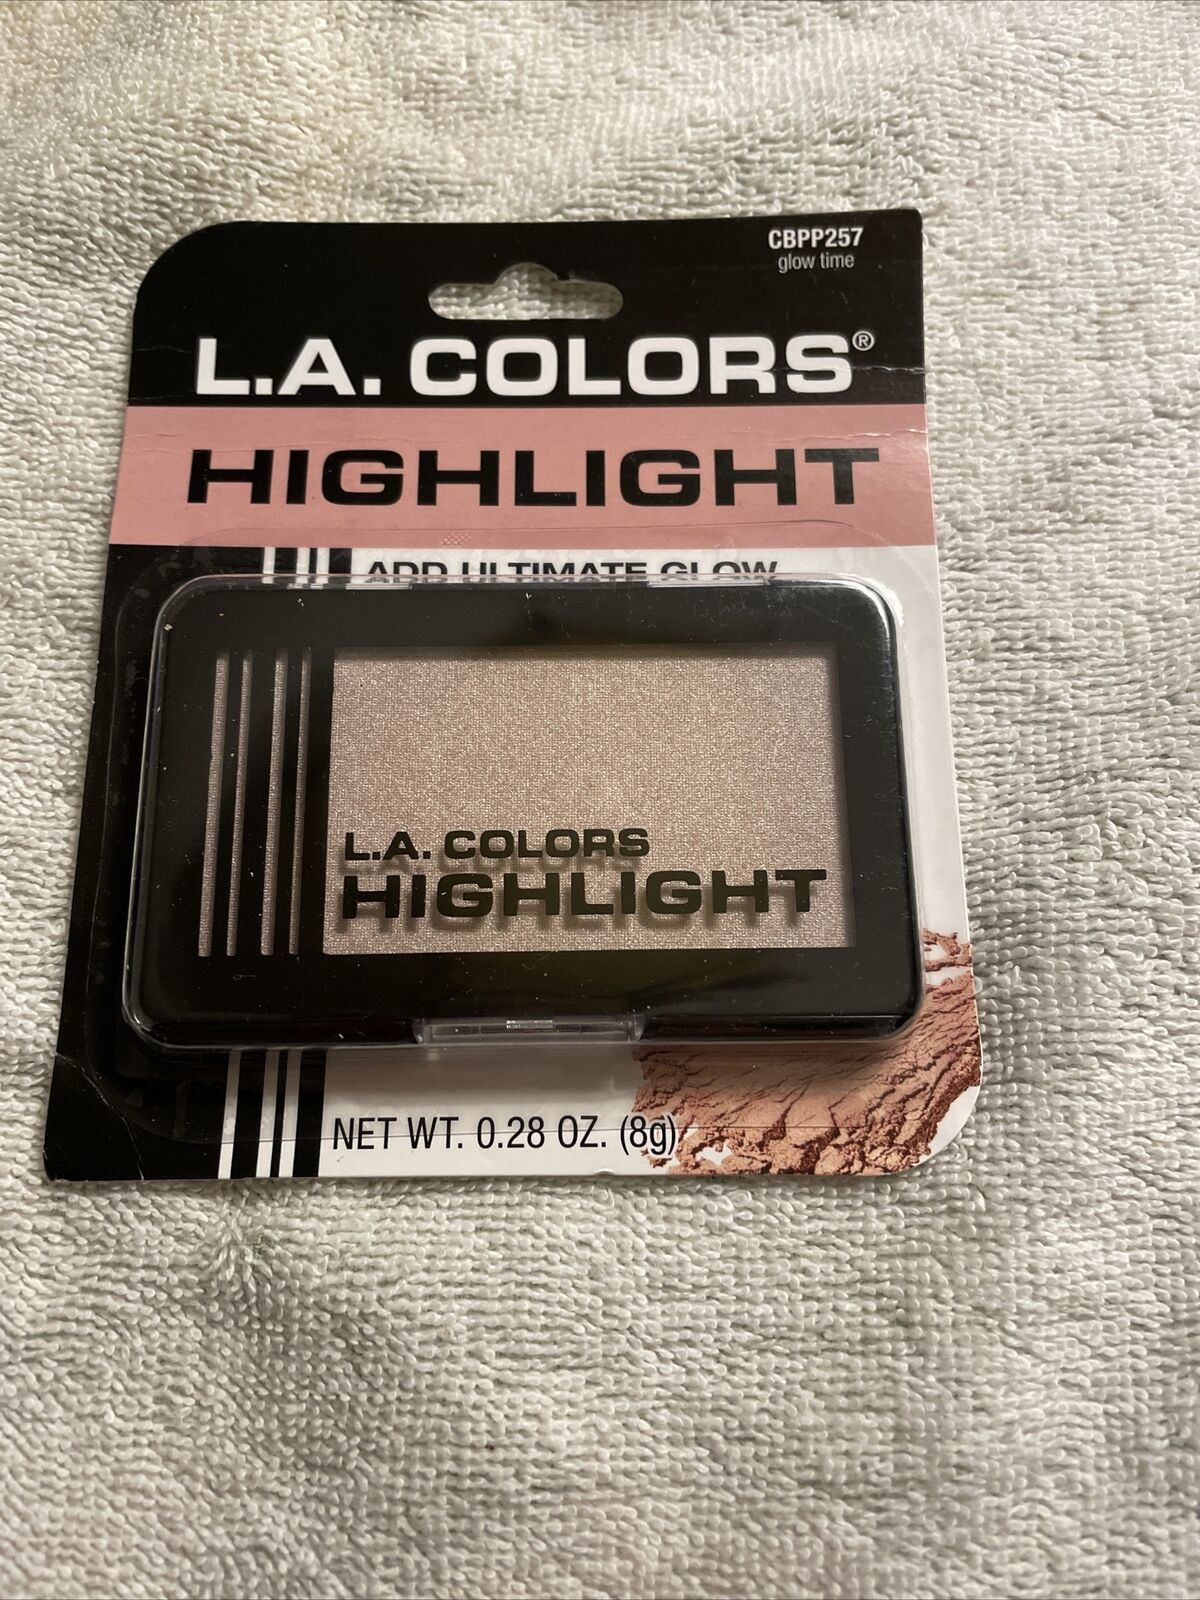 L.A. COLORS HIGHLIGHT CBPP257 Glow Time Amazing Add Ultimate Glow-New-SHIP N24HR - $11.76